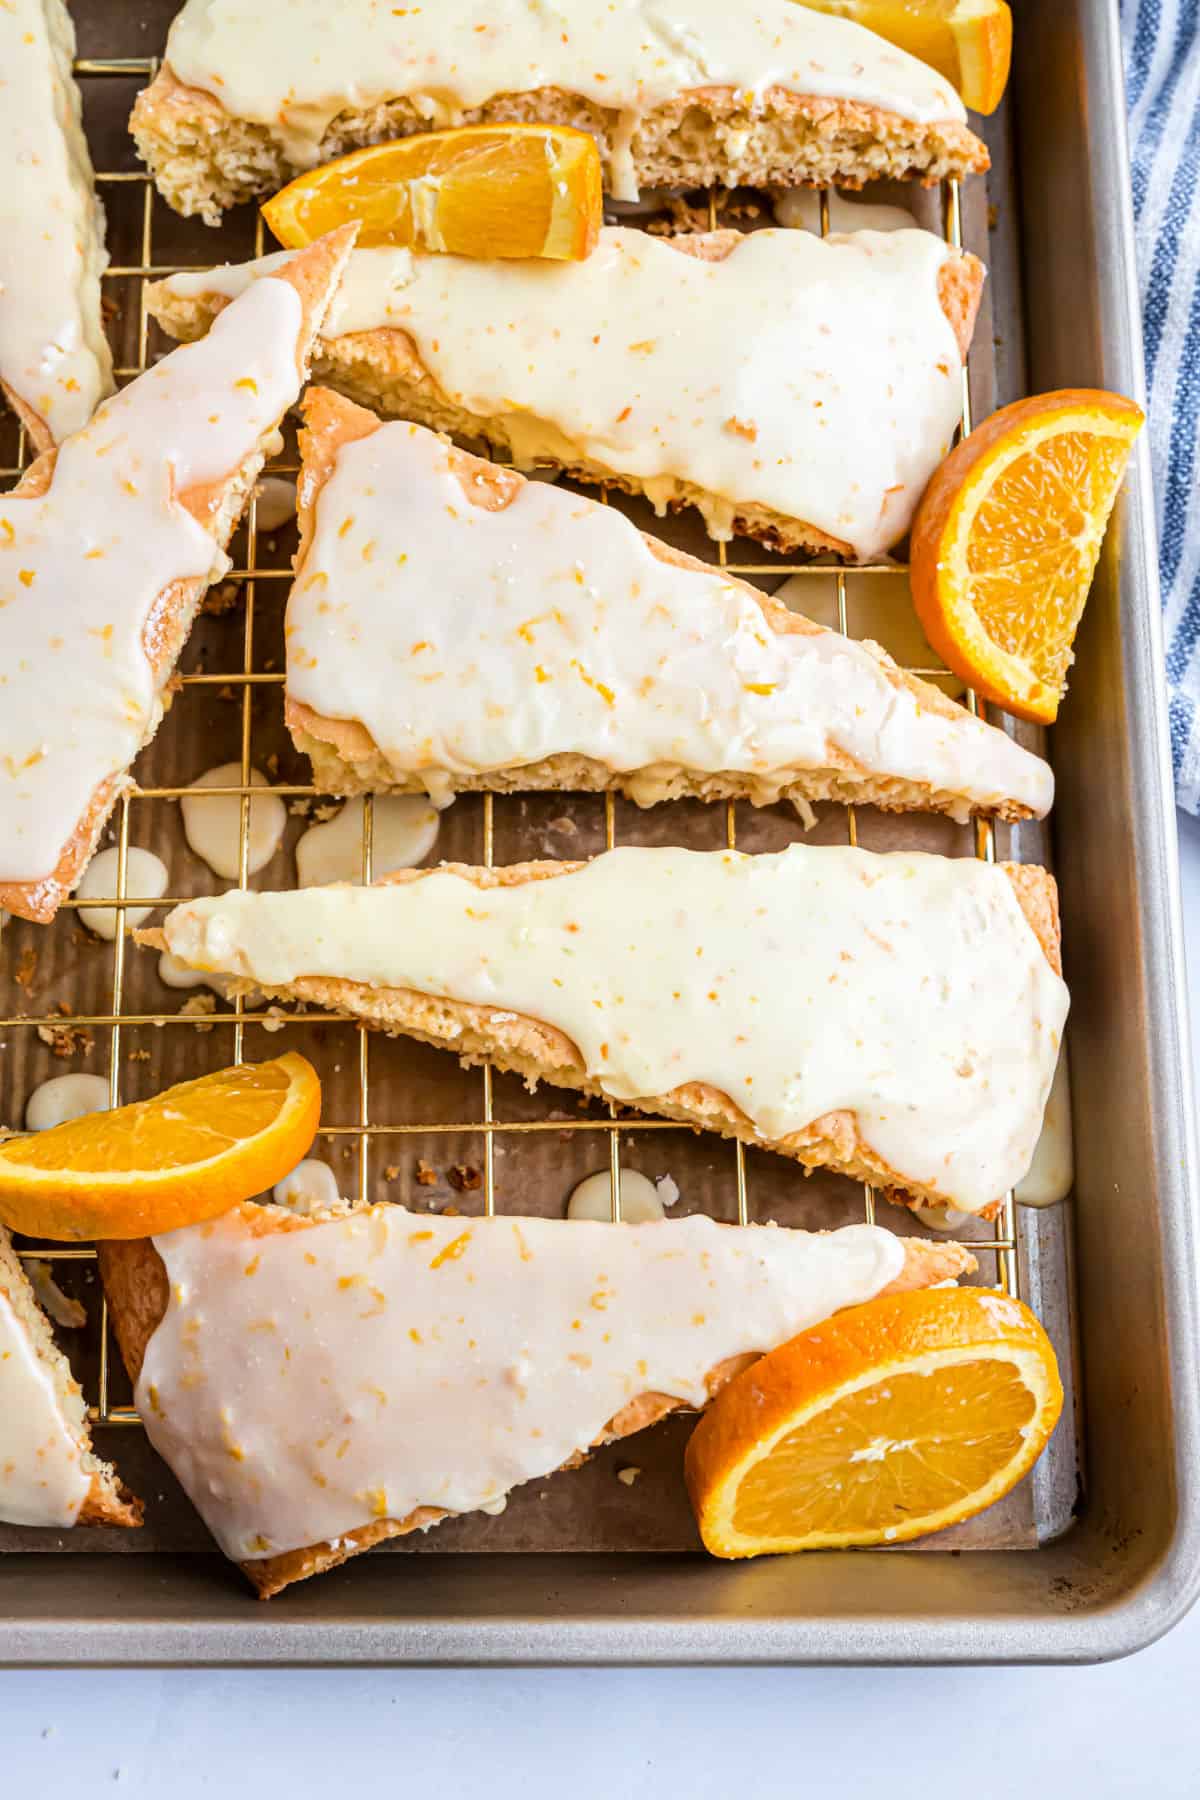 Scones on a baking sheet with slices of oranges.